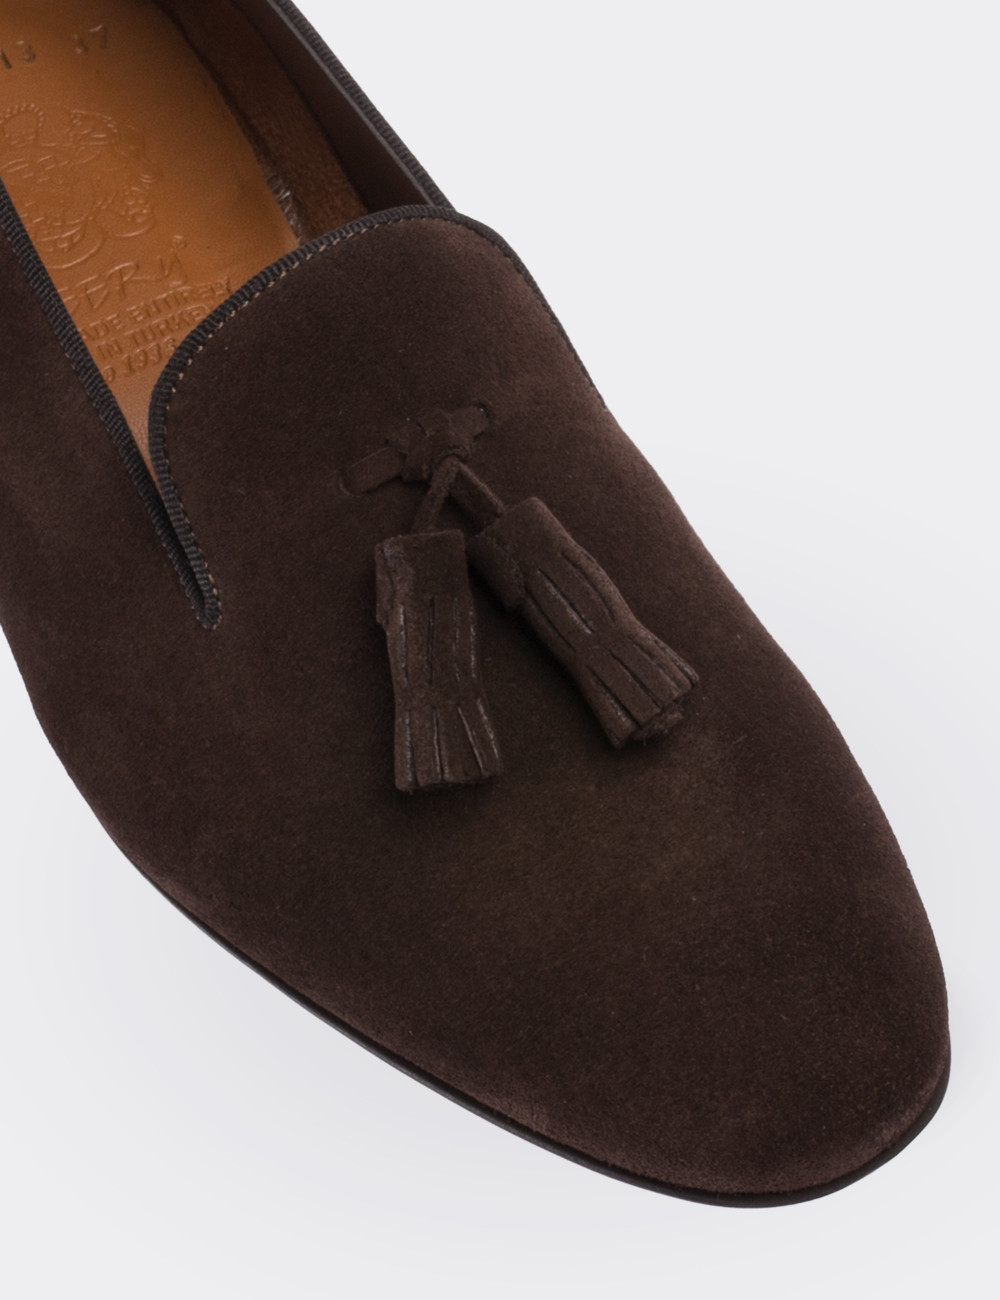 Brown Suede Leather Loafers - 01613ZKHVM02